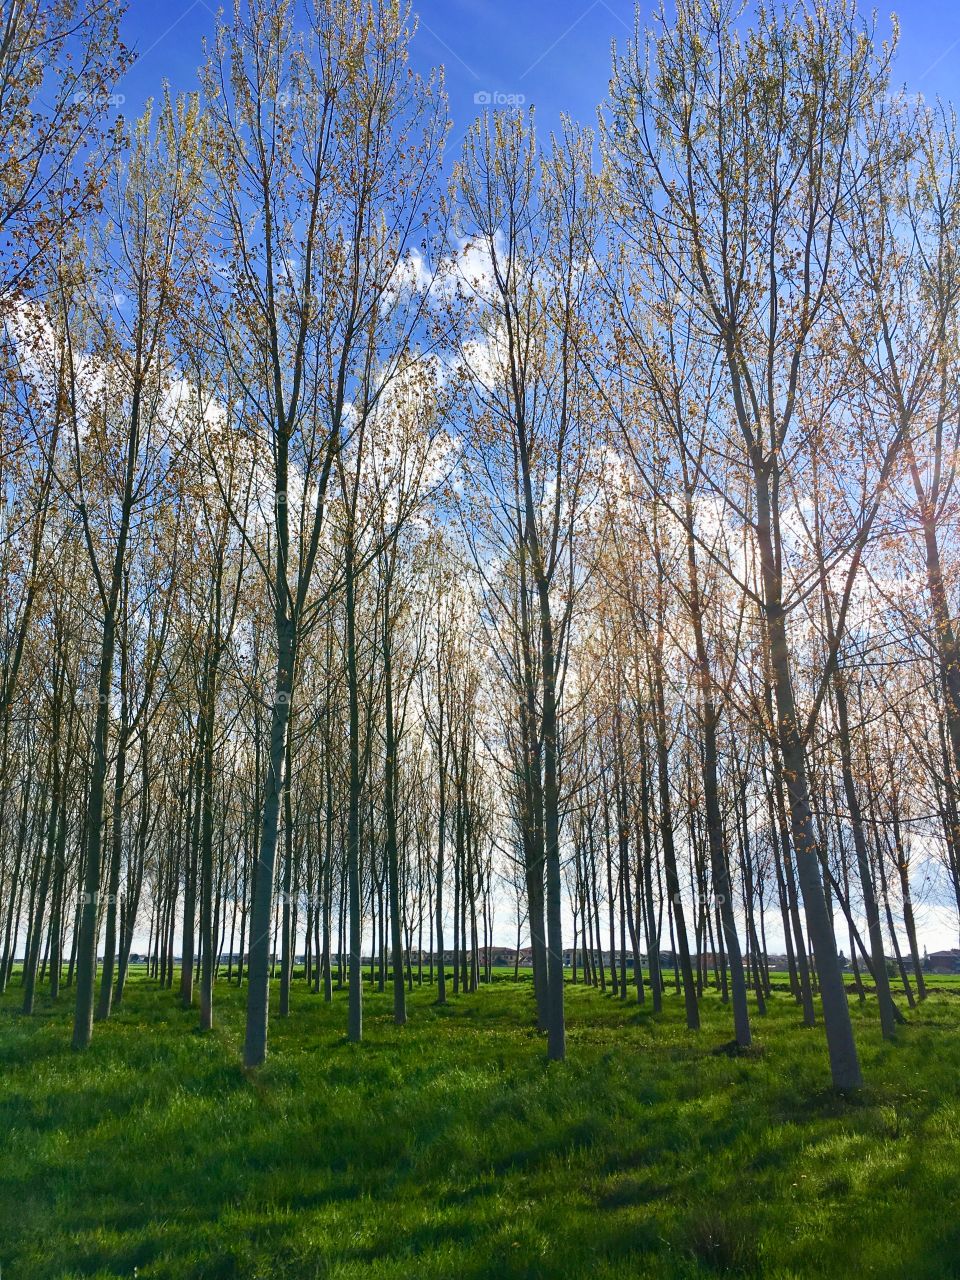 bucolic image of a poplar grove in spring in the Piedmont countryside